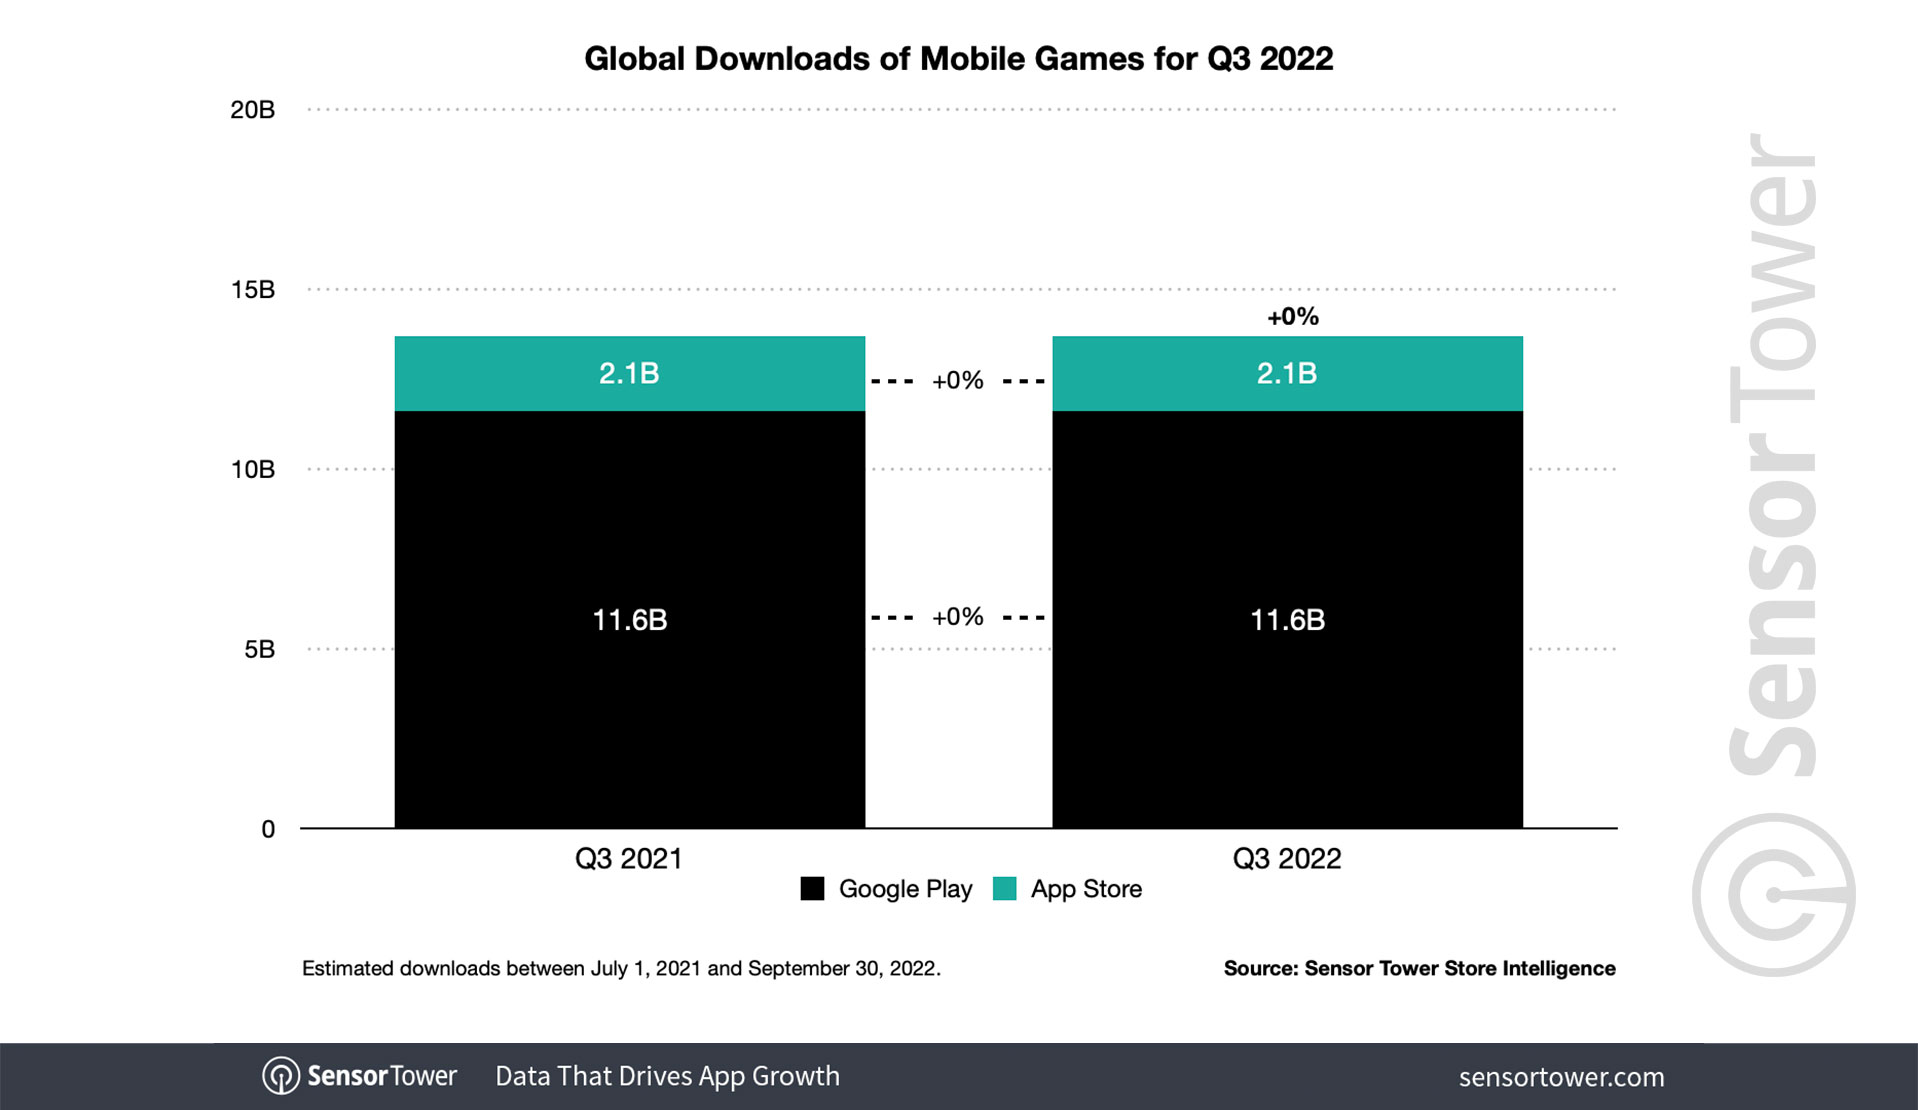 Top Mobile Games Worldwide for January 2022 by Downloads